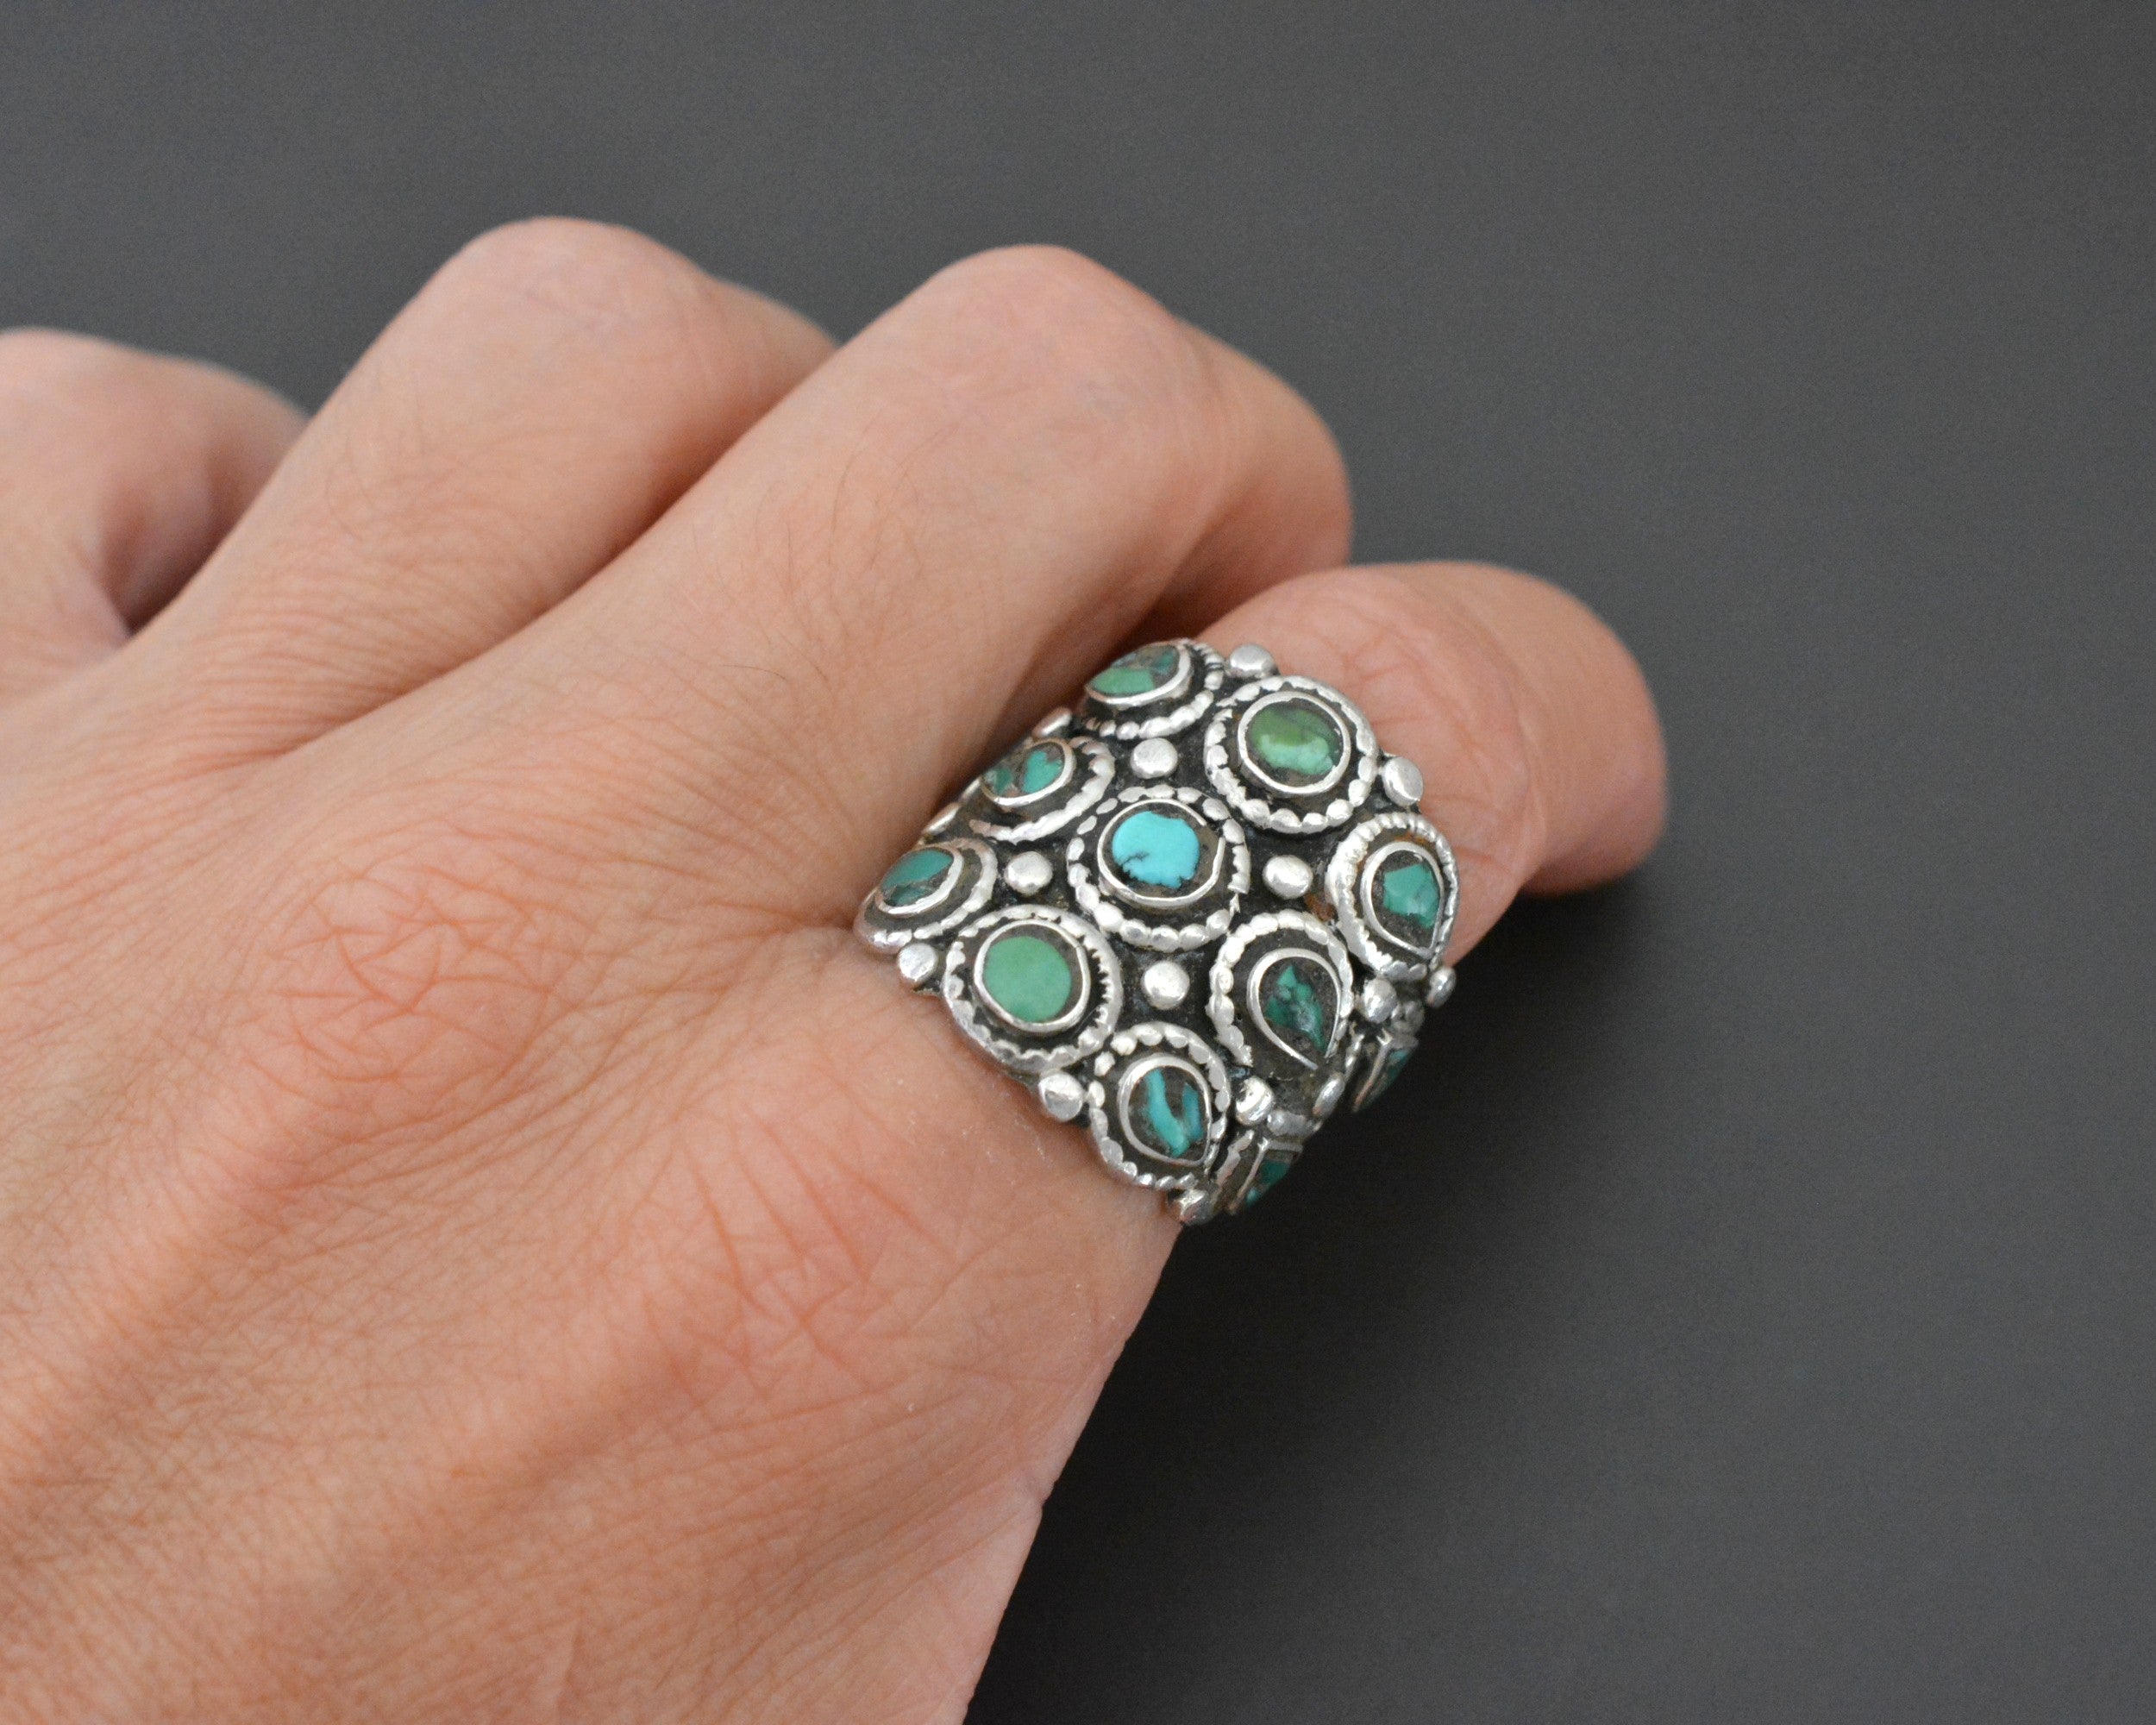 Reserved for B. - Ladakh Turquoise Ring - Size 8.5